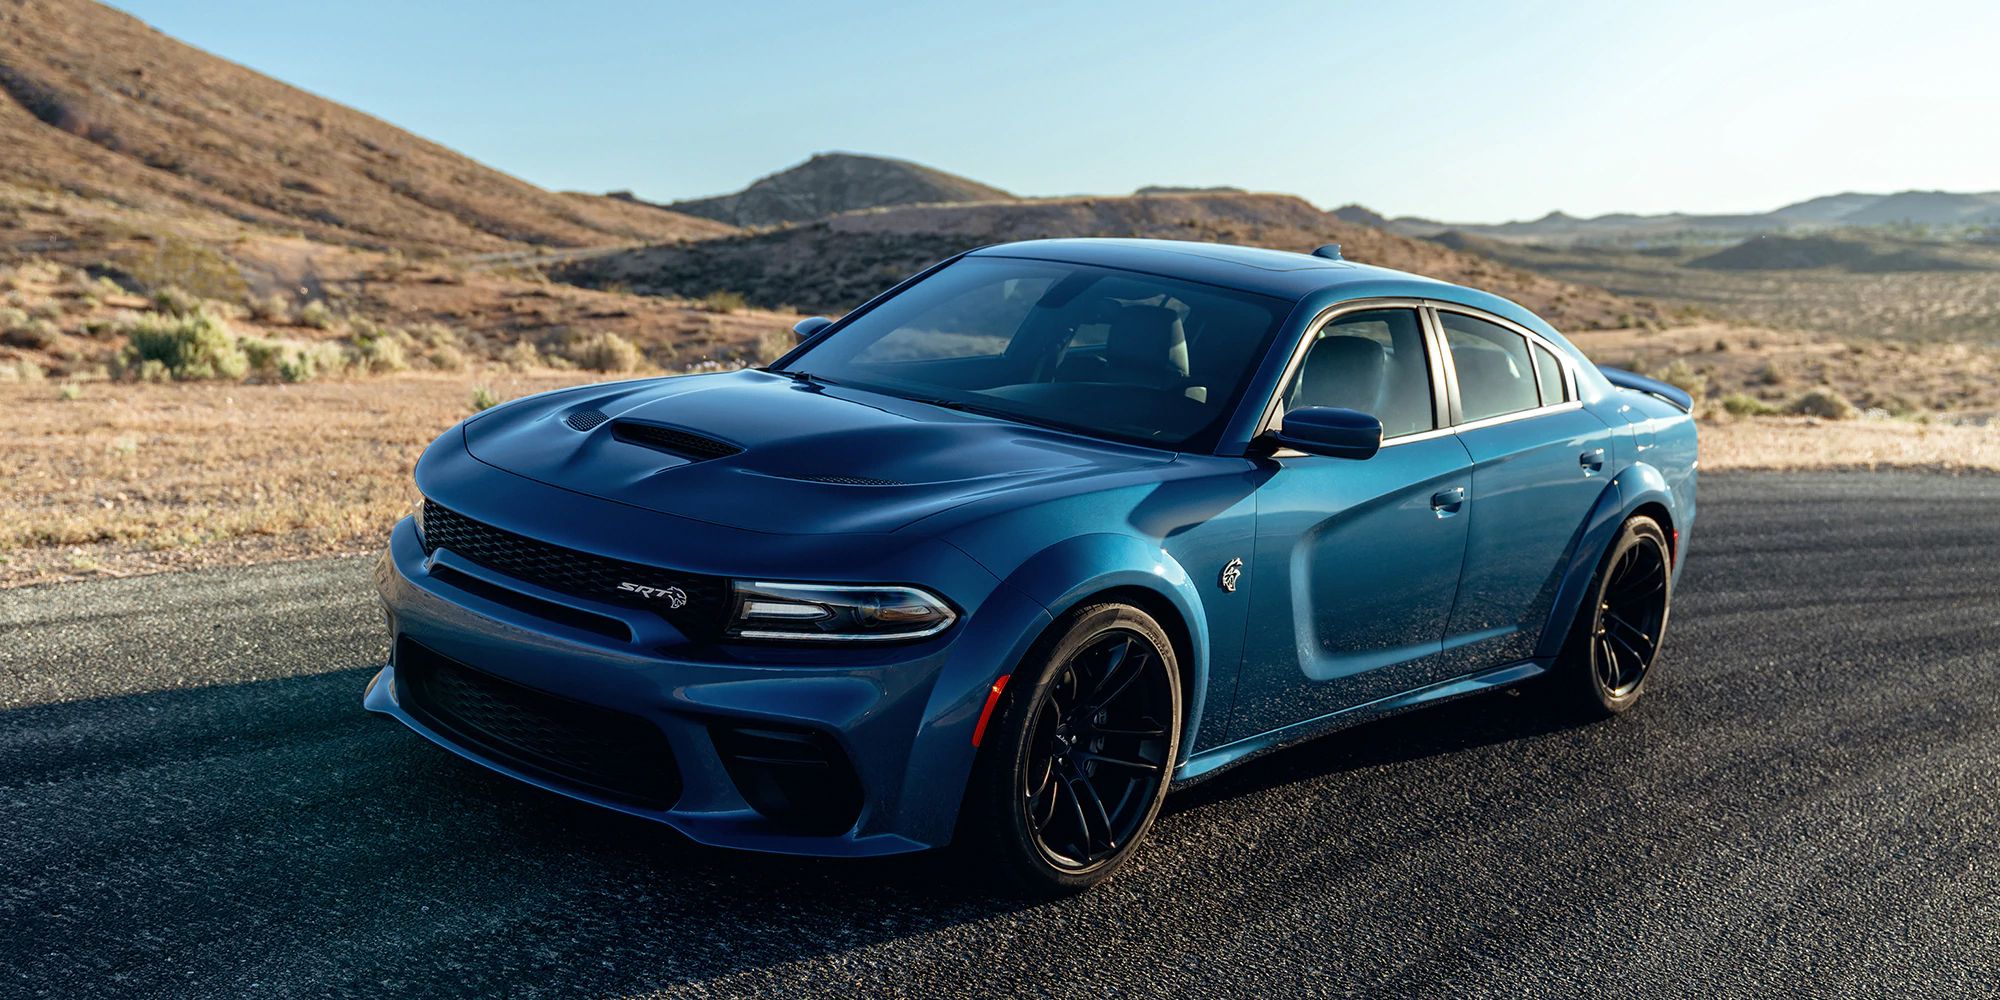 A blue Charger Hellcat, left 3/4 view